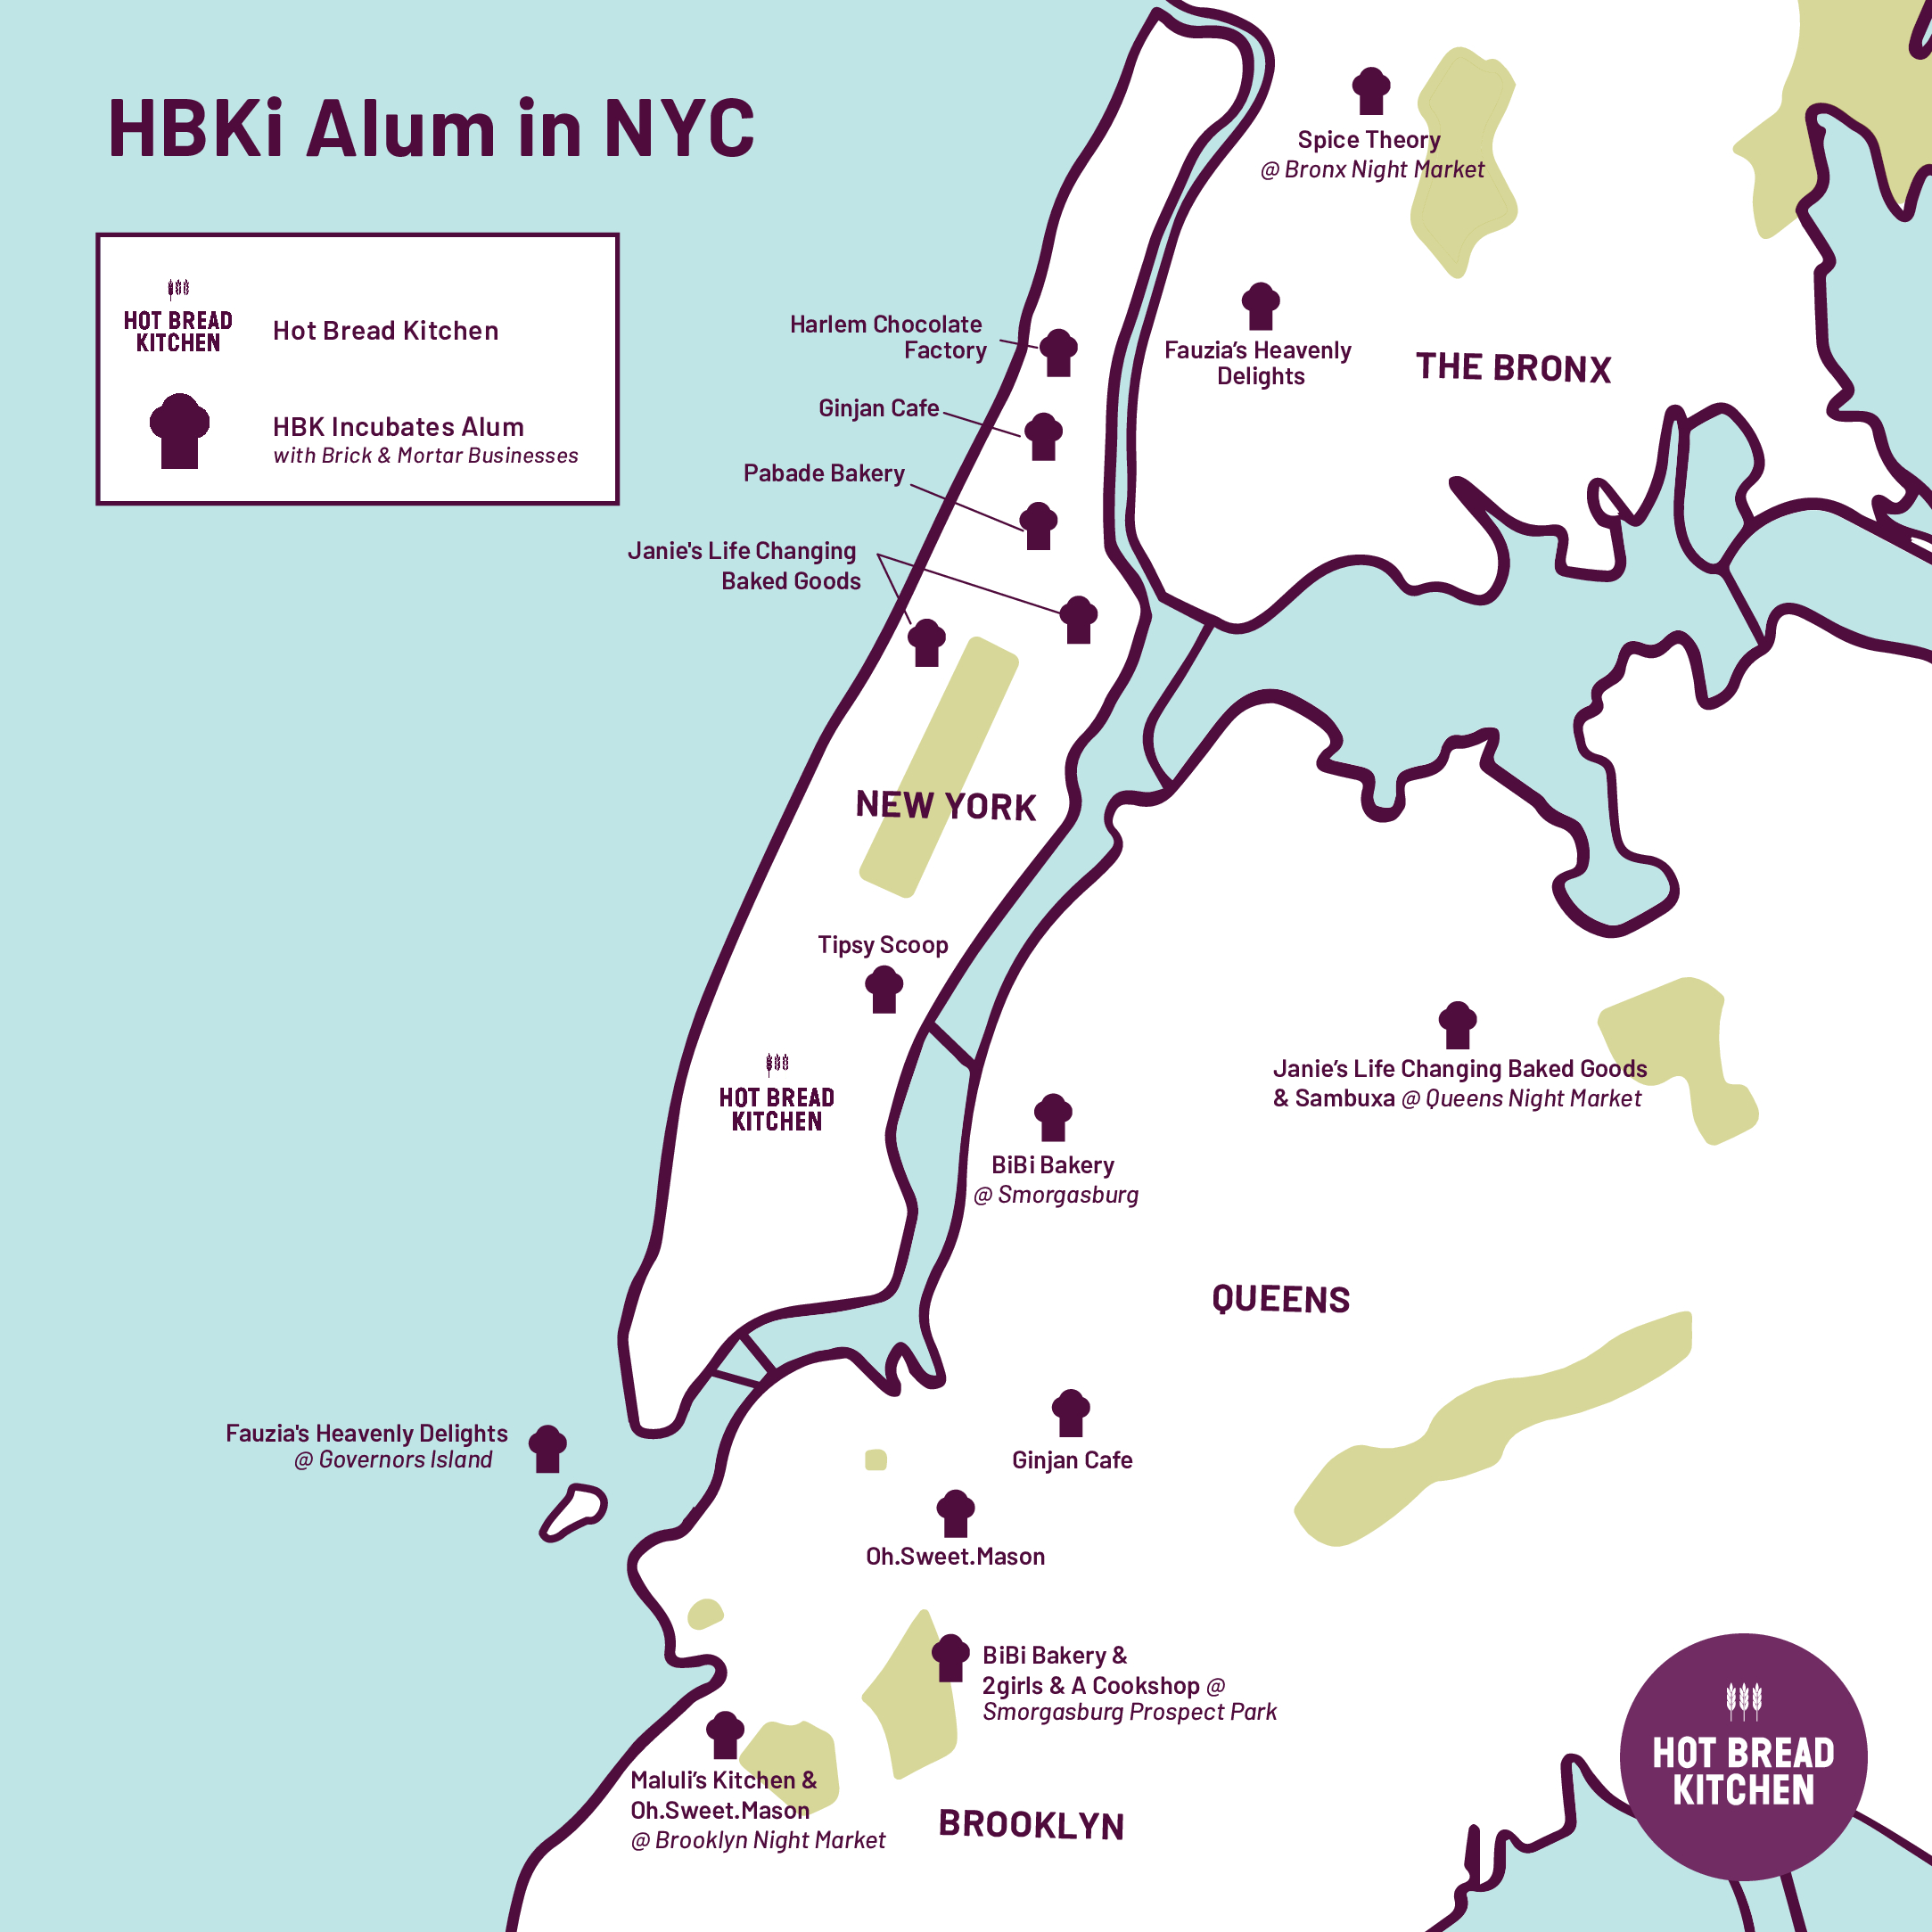 Map of NYC showing the locations of Hot Bread Kitchen entrepreneurs